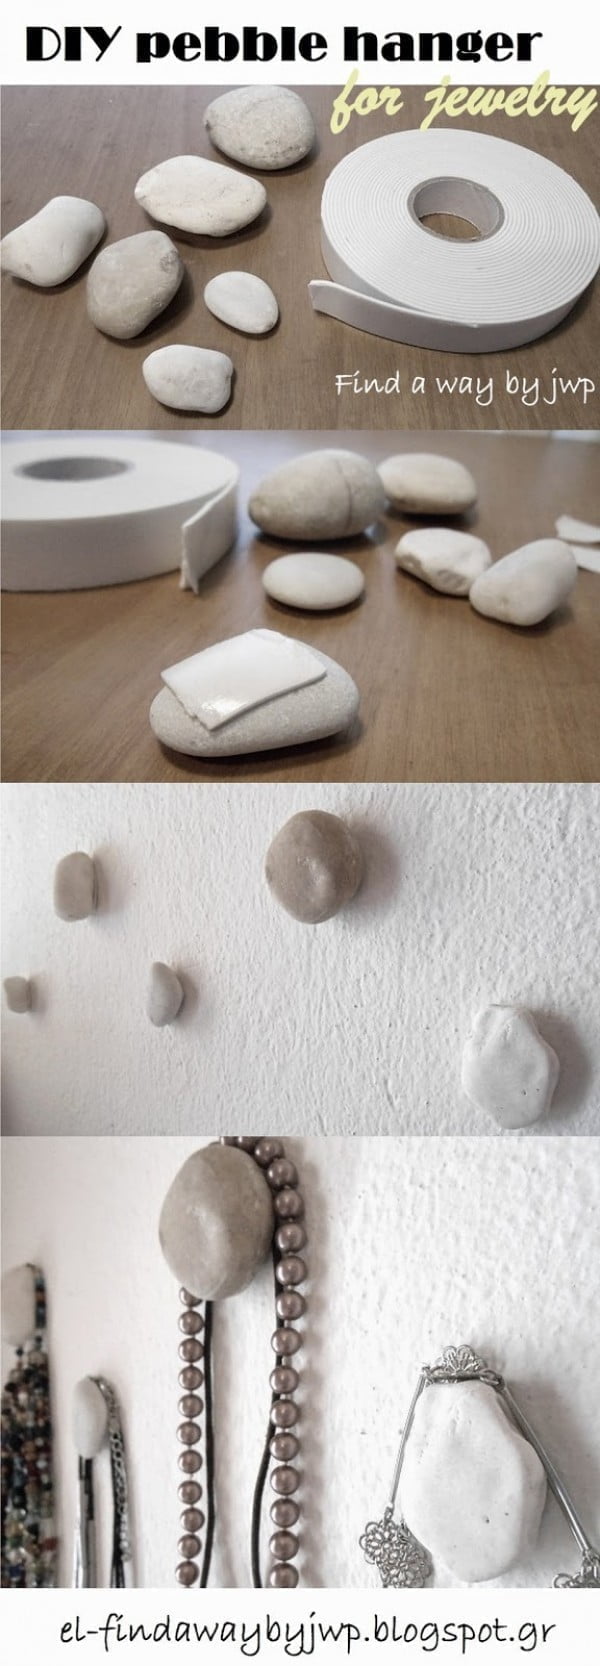 16 Beautiful DIY Bedroom Decor Ideas That Will Inspire You - Check out how to easily make DIY pebble hangers for bedroom decor